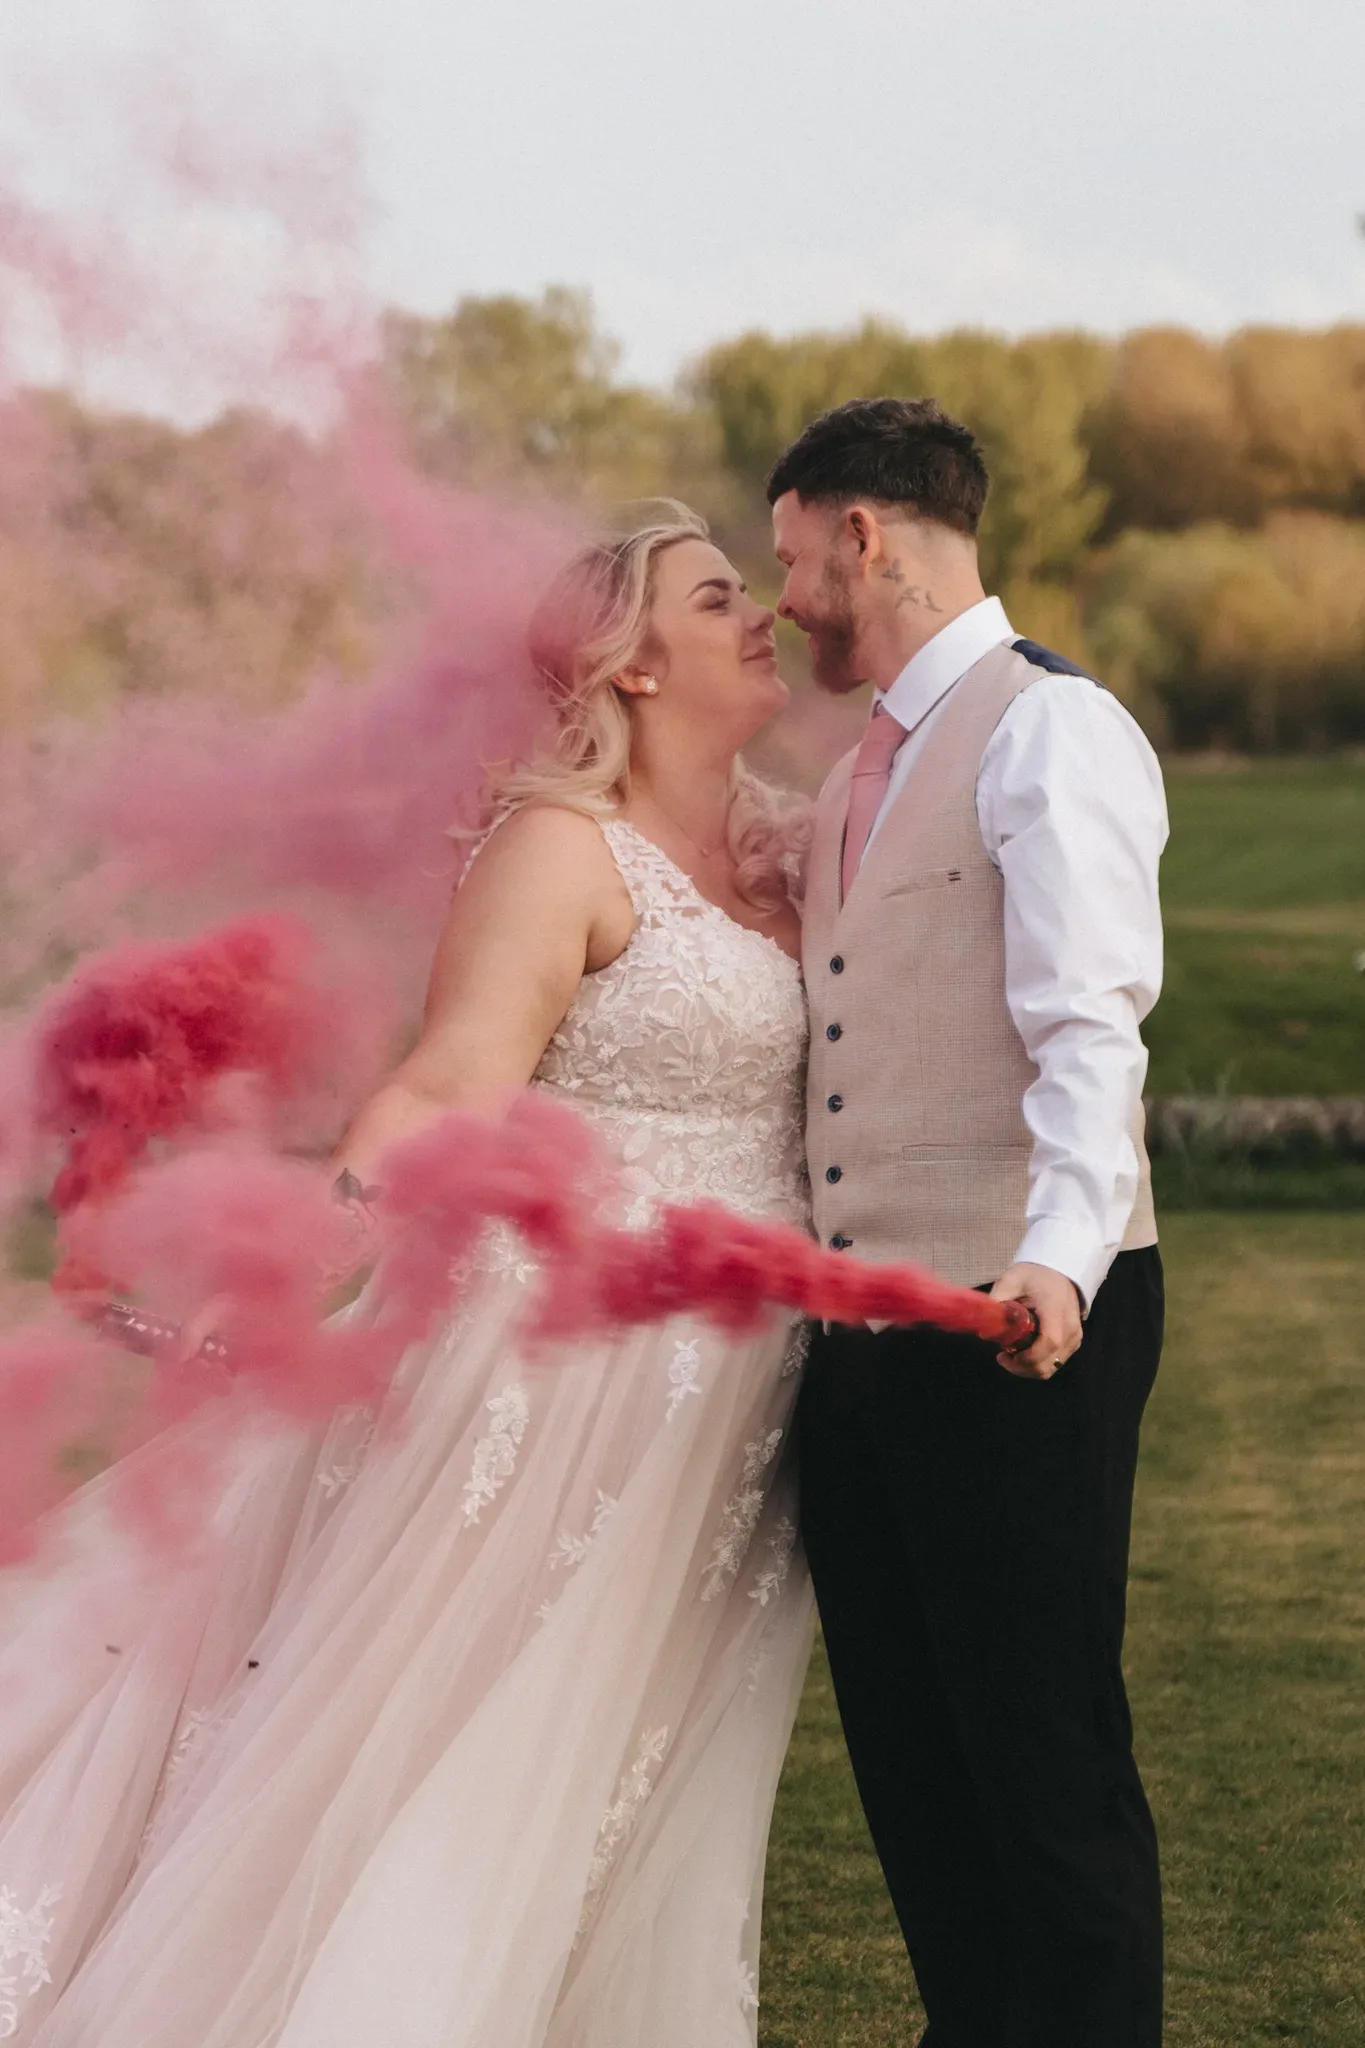 A bride and groom embrace outdoors with pink smoke swirling around them. the bride wears a white gown and the groom is in a gray vest and white shirt. they gaze affectionately at each other with a grassy field and trees in the background.